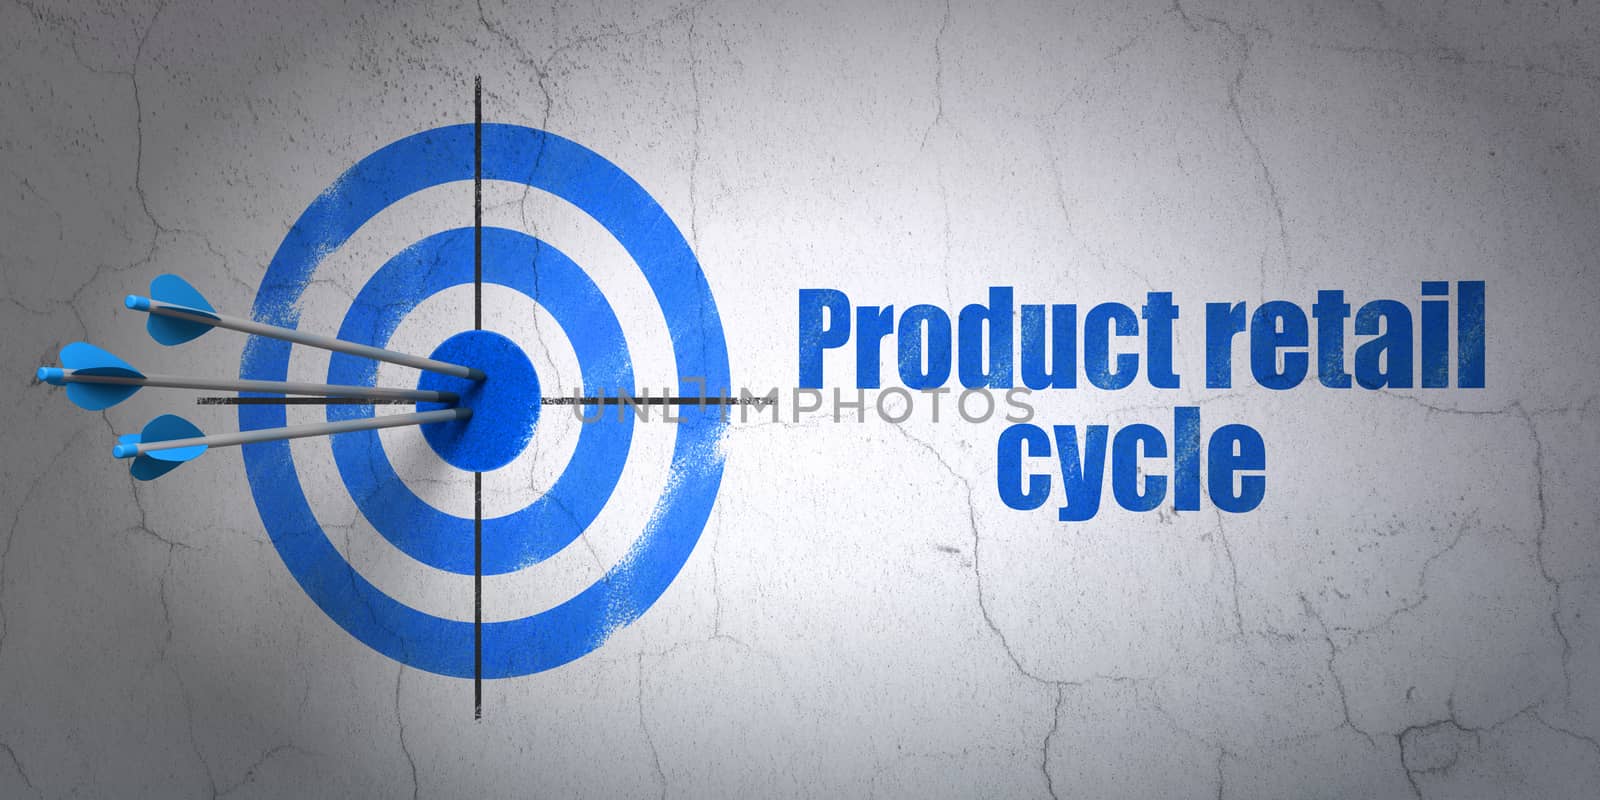 Success advertising concept: arrows hitting the center of target, Blue Product retail Cycle on wall background, 3D rendering